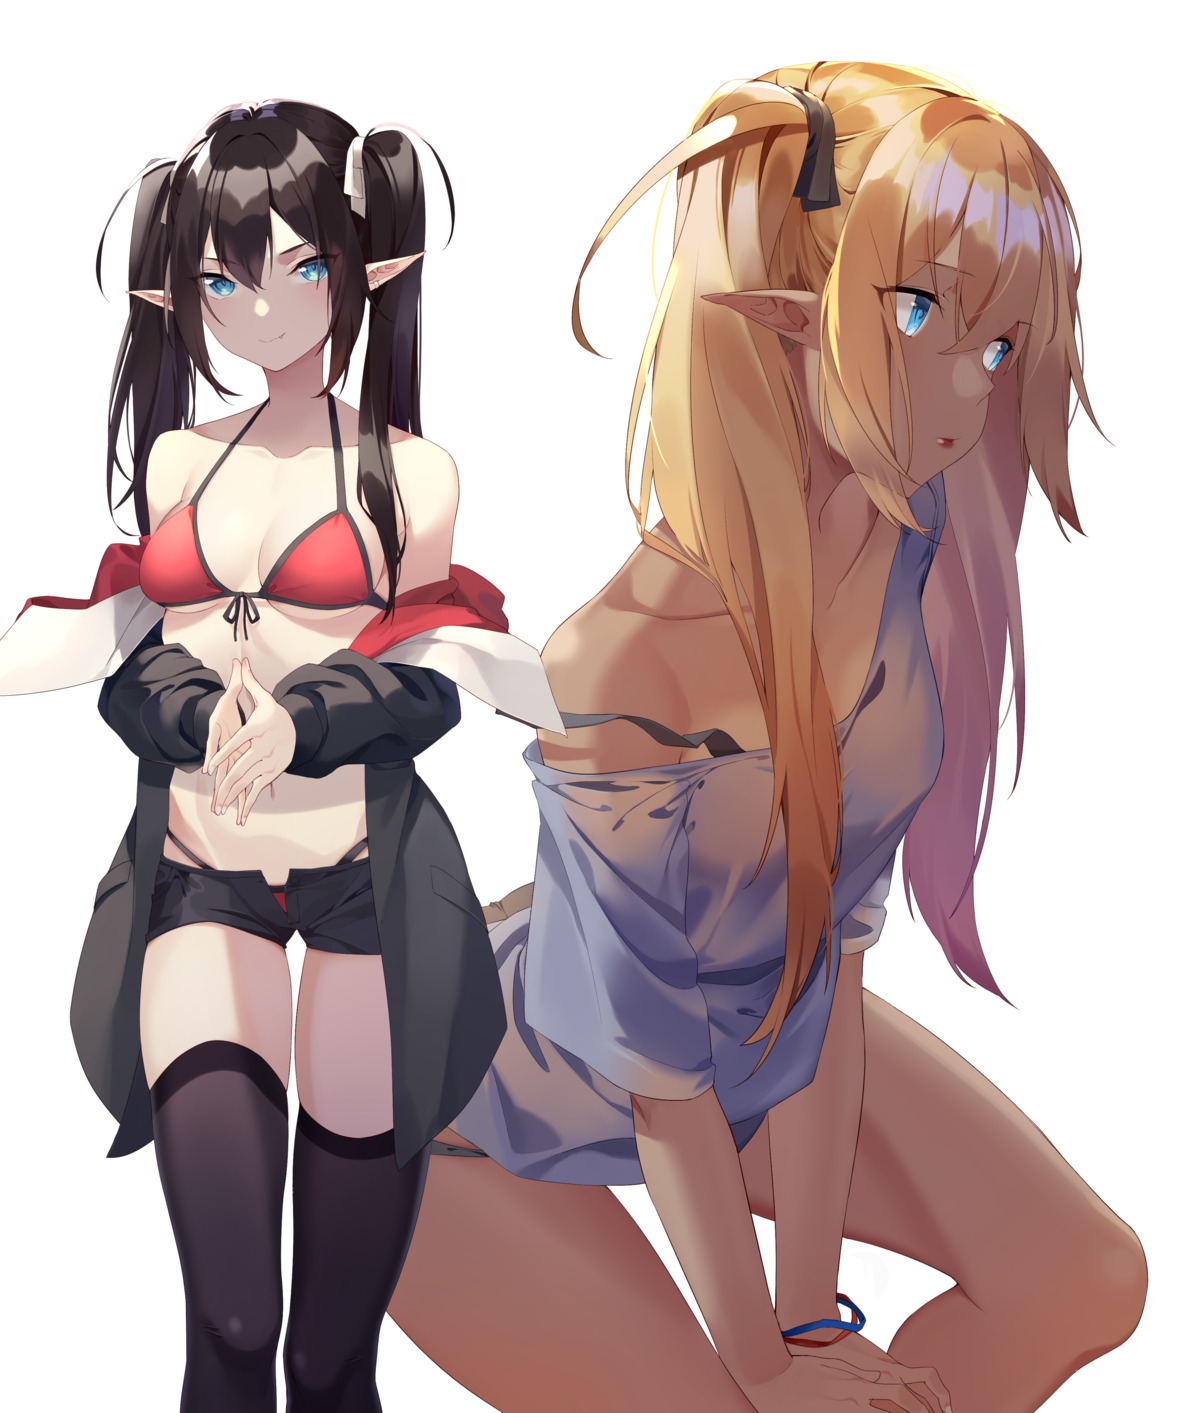 bikini cleavage open_shirt pointy_ears see_through swimsuits thighhighs underboob user_yzzn3747